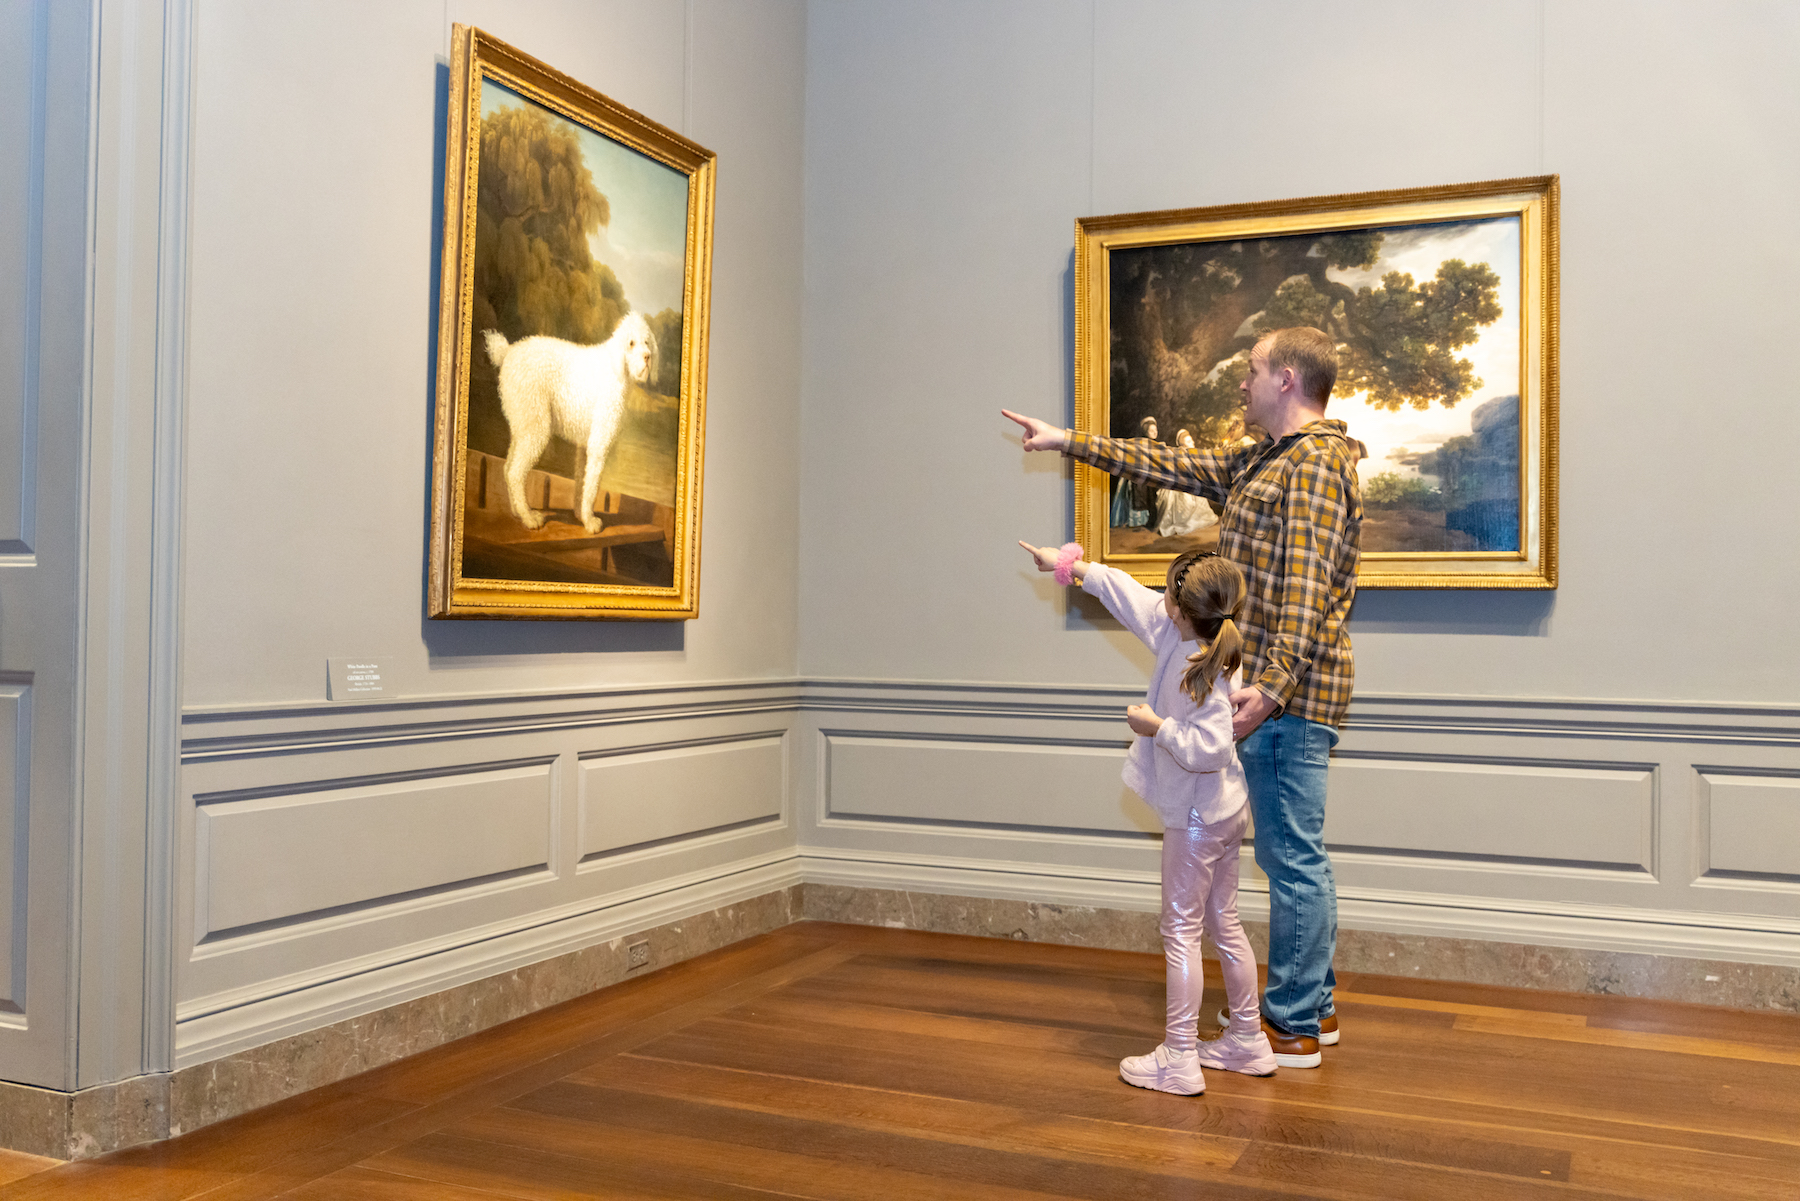 Addy and Austin Graff look at George Stubb's White Poodle in a Punt together